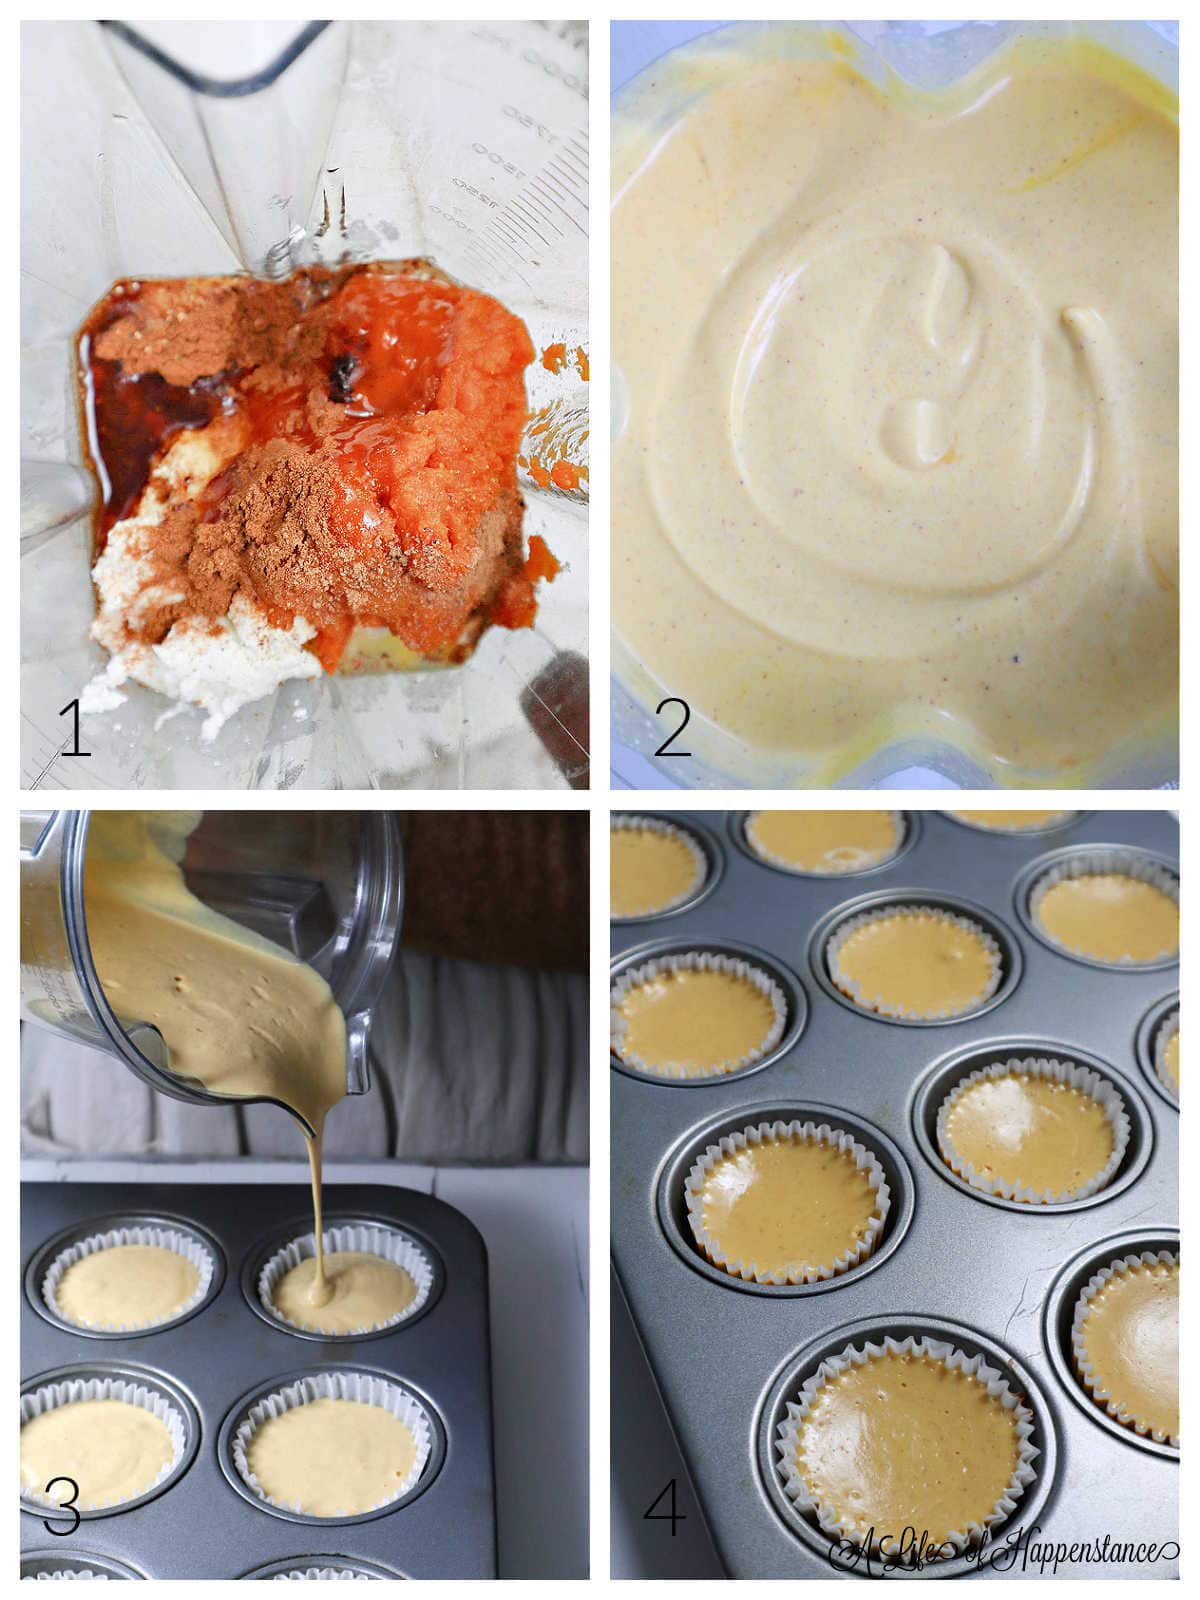 A four photo collage showing how to make the filling. Photo one; all of the ingredients in the blender. Photo two; the mixture blended and creamy. Photo three; pouring the filling into the prepared muffin cups. Photo four; the cheesecakes baked and cooling in the muffin tin.